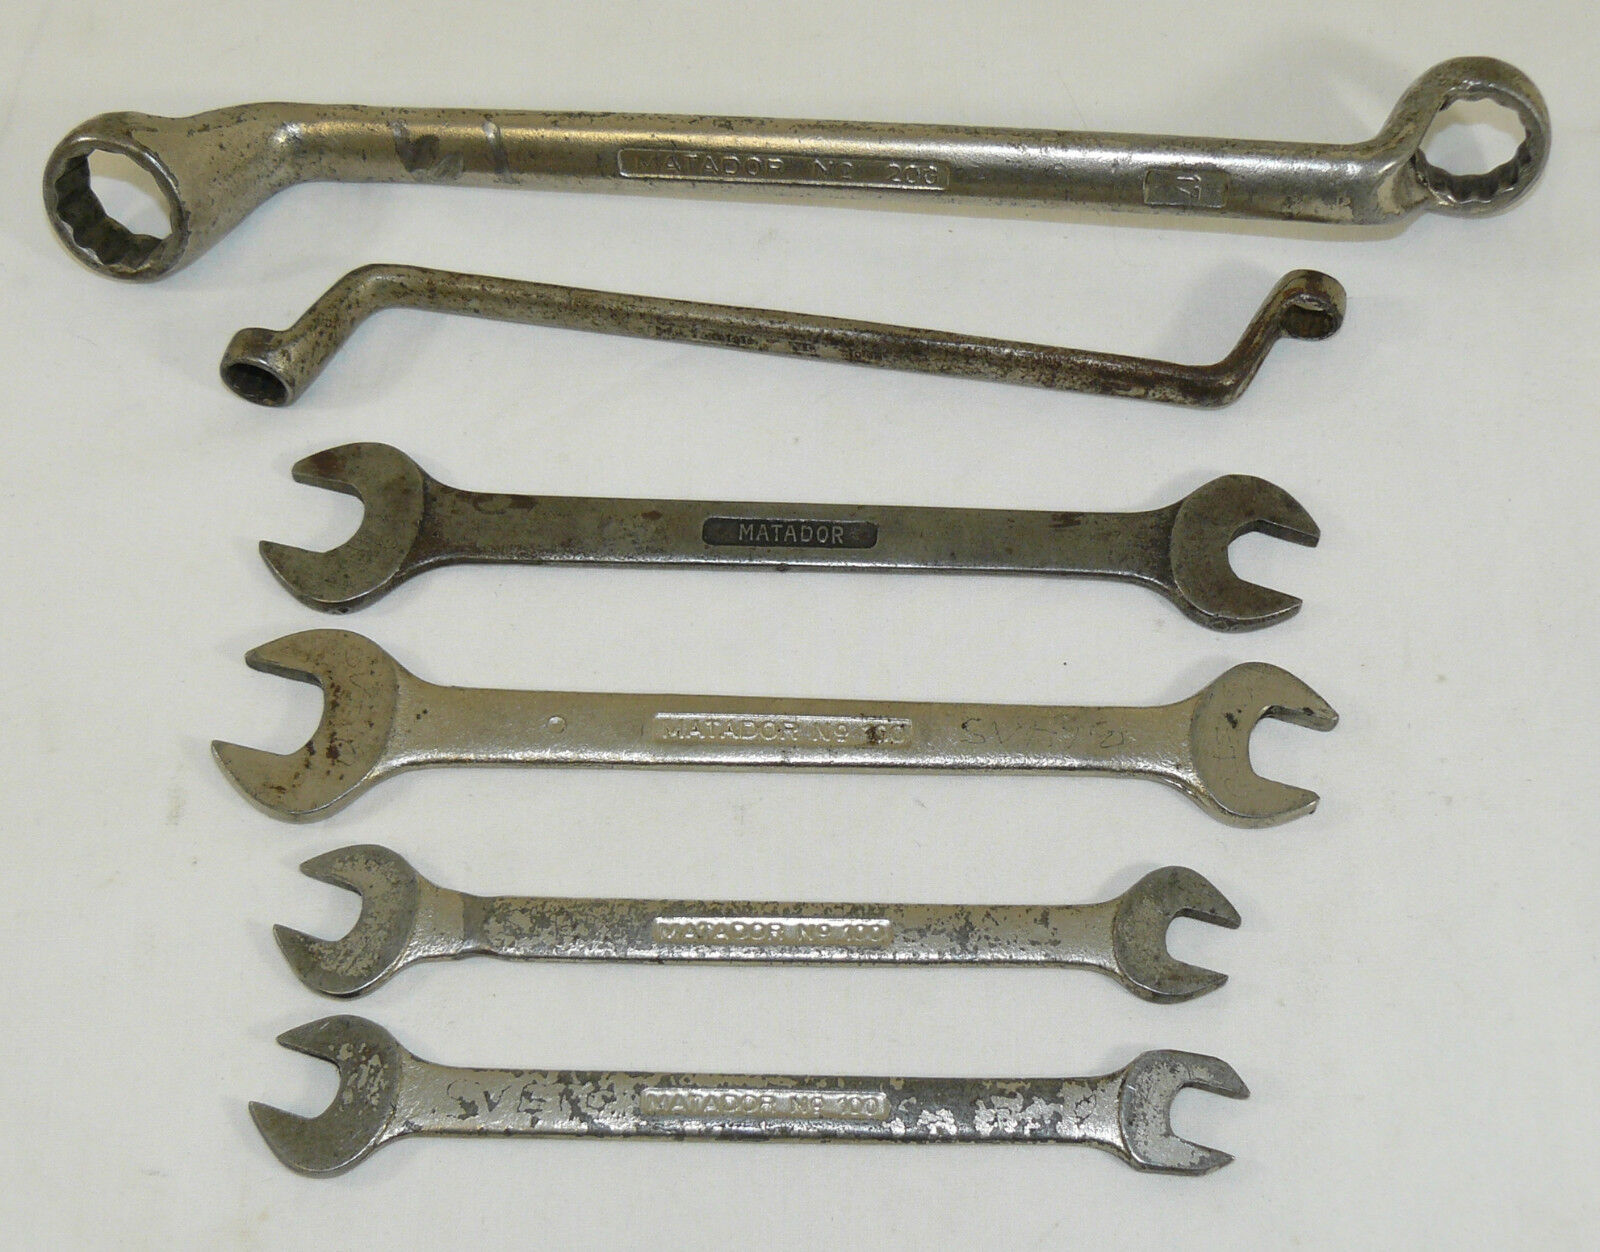 6 Vintage Metric Mechanics Wrenches Matador Tools Open End Box Wrenches Germany 